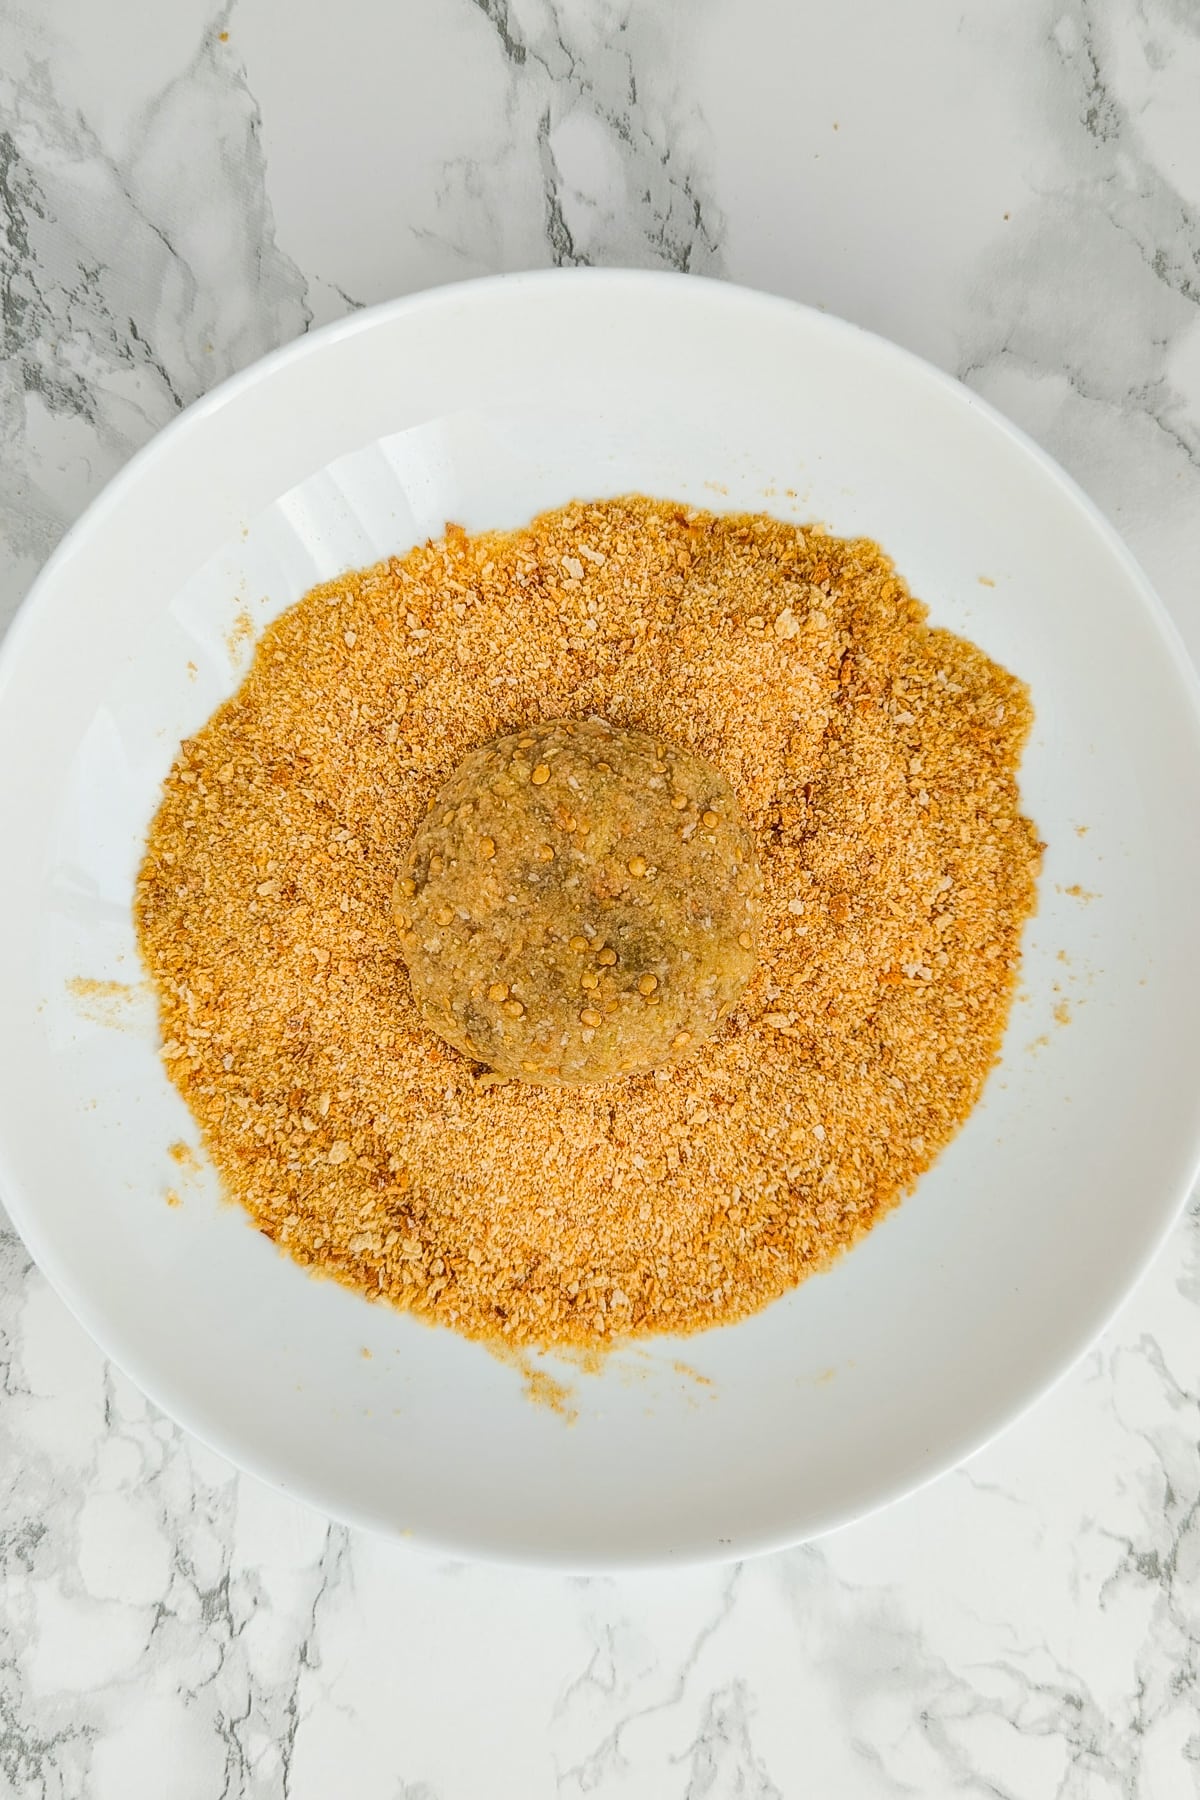 Top view of a white plate with breadcrumbs and eggplant patties coated in breadcrumbs.